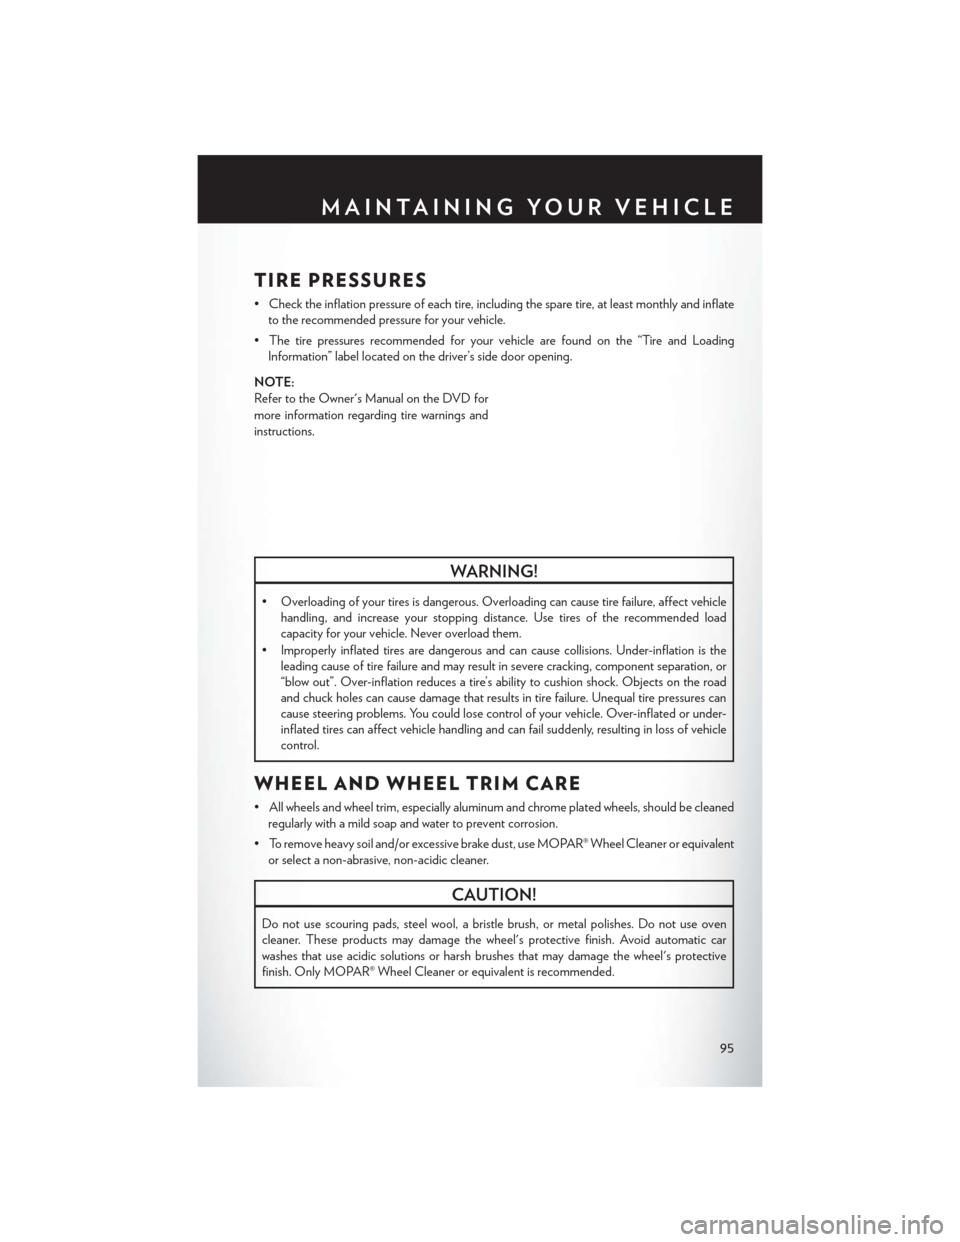 CHRYSLER 200 2013 1.G User Guide TIRE PRESSURES
• Check the inflation pressure of each tire, including the spare tire, at least monthly and inflateto the recommended pressure for your vehicle.
• The tire pressures recommended for